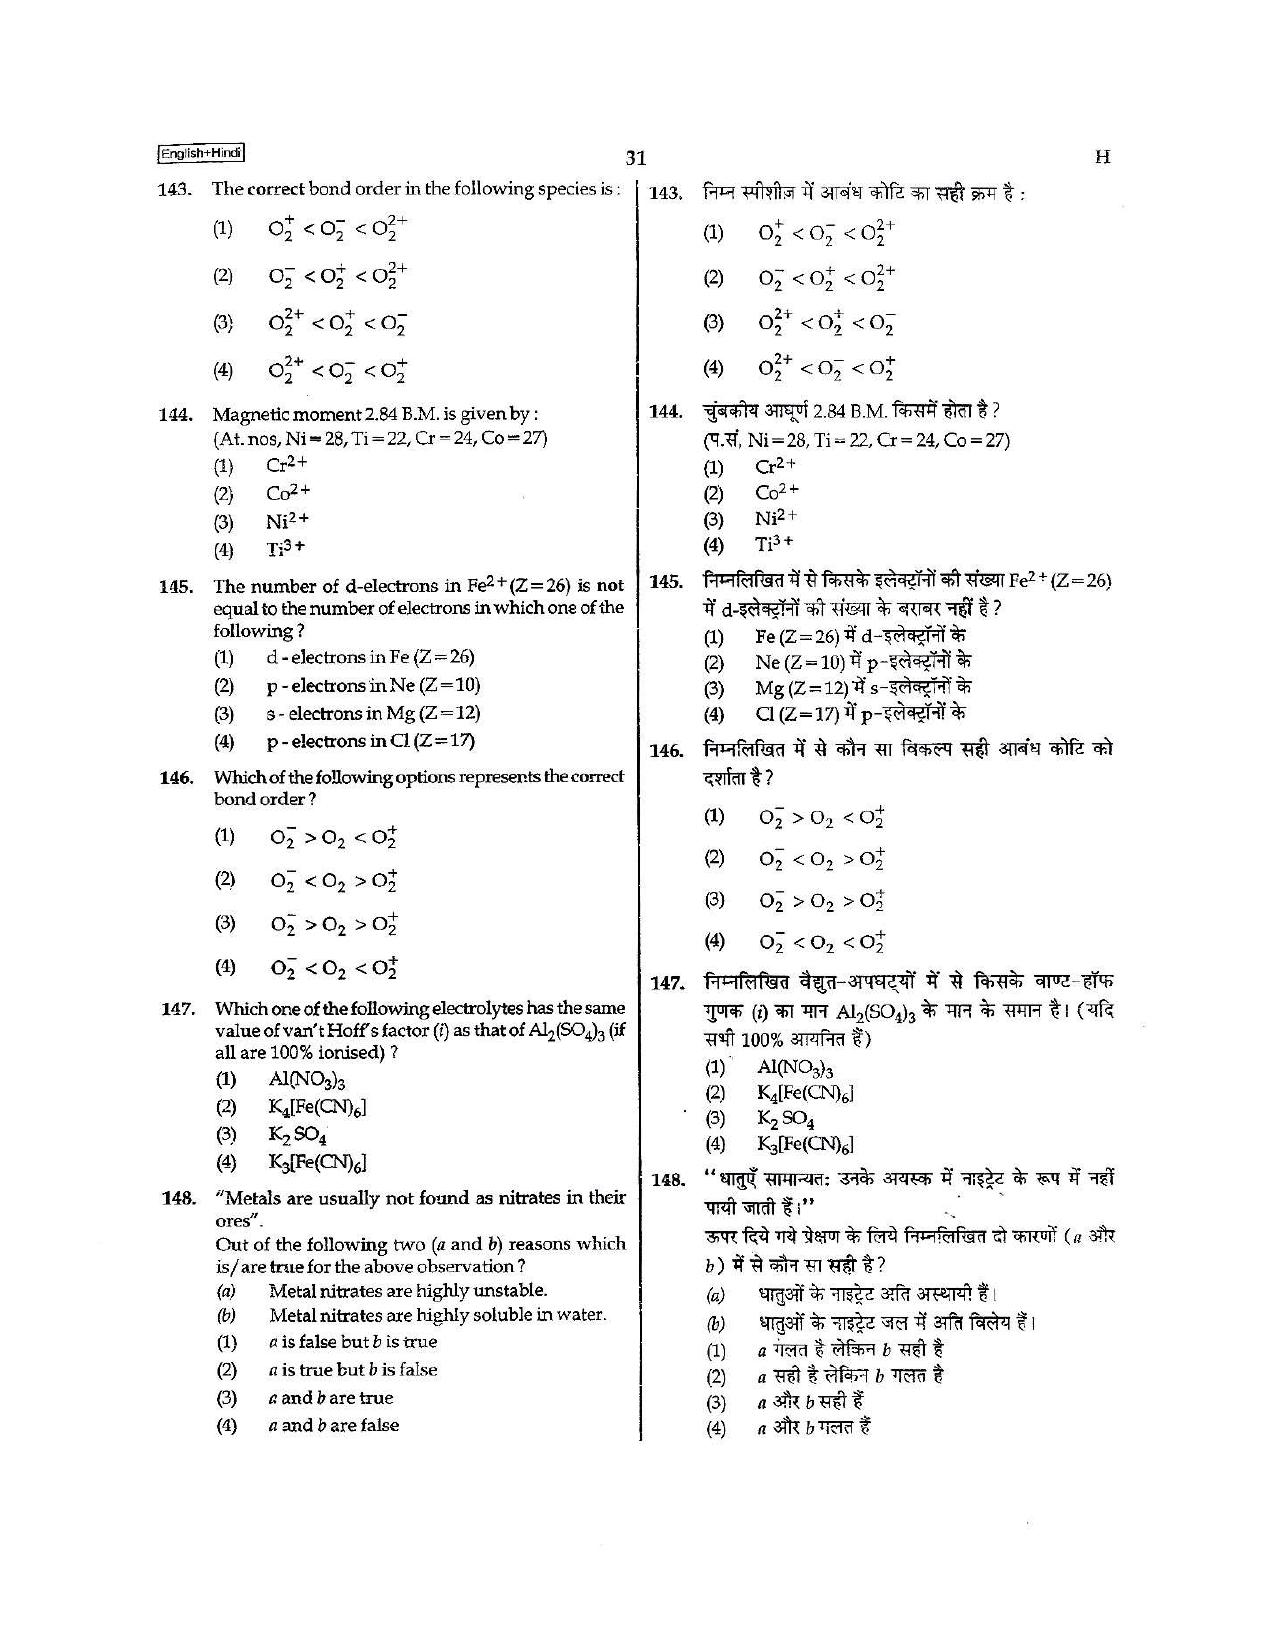 NEET Code H 2015 Question Paper - Page 31